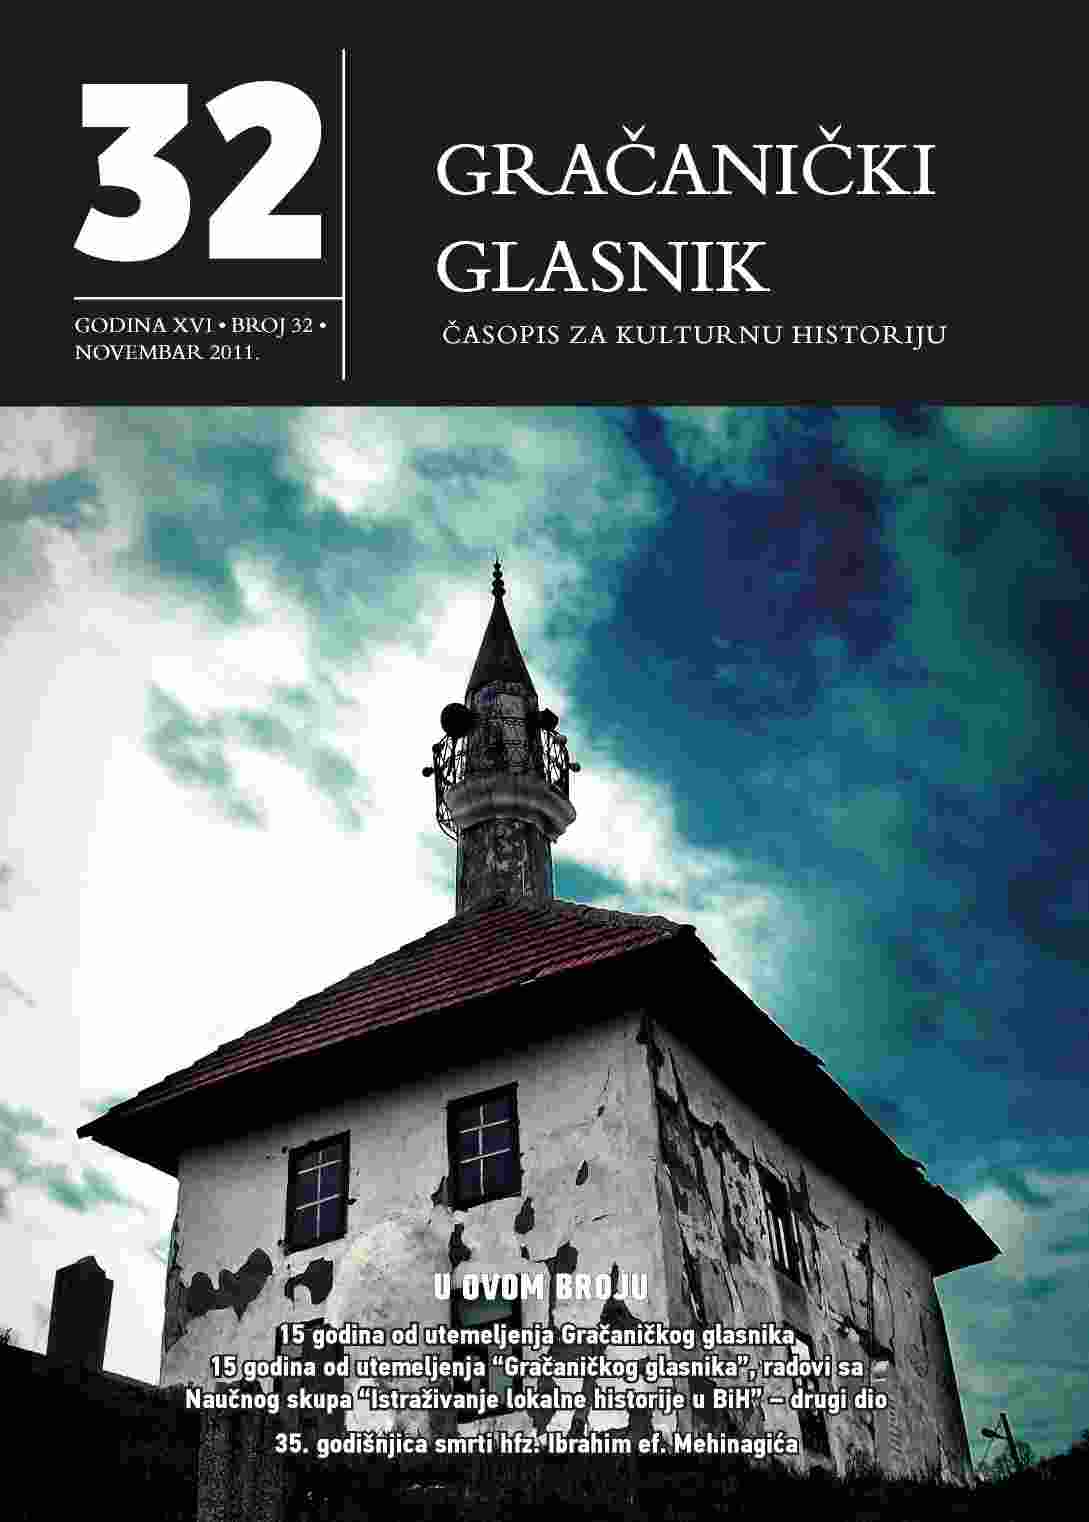 Archive of Bosnia and Herzegovina and the research of history of local communities Cover Image